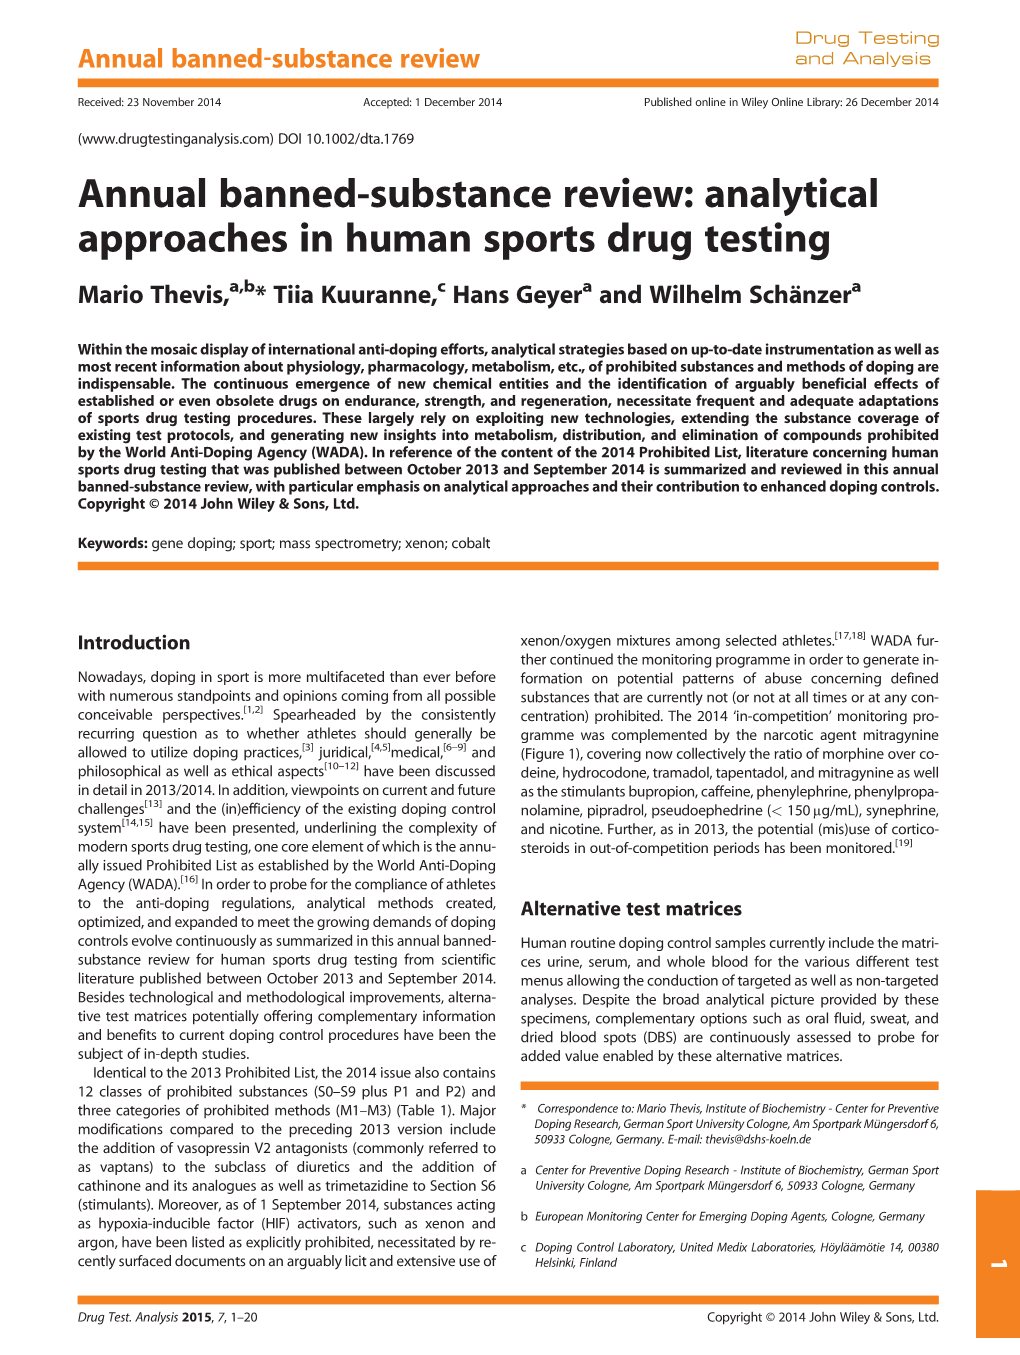 Annual Banned-Substance Review: Analytical Approaches in Human Sports Drug Testing Mario Thevis,A,B* Tiia Kuuranne,C Hans Geyera and Wilhelm Schänzera